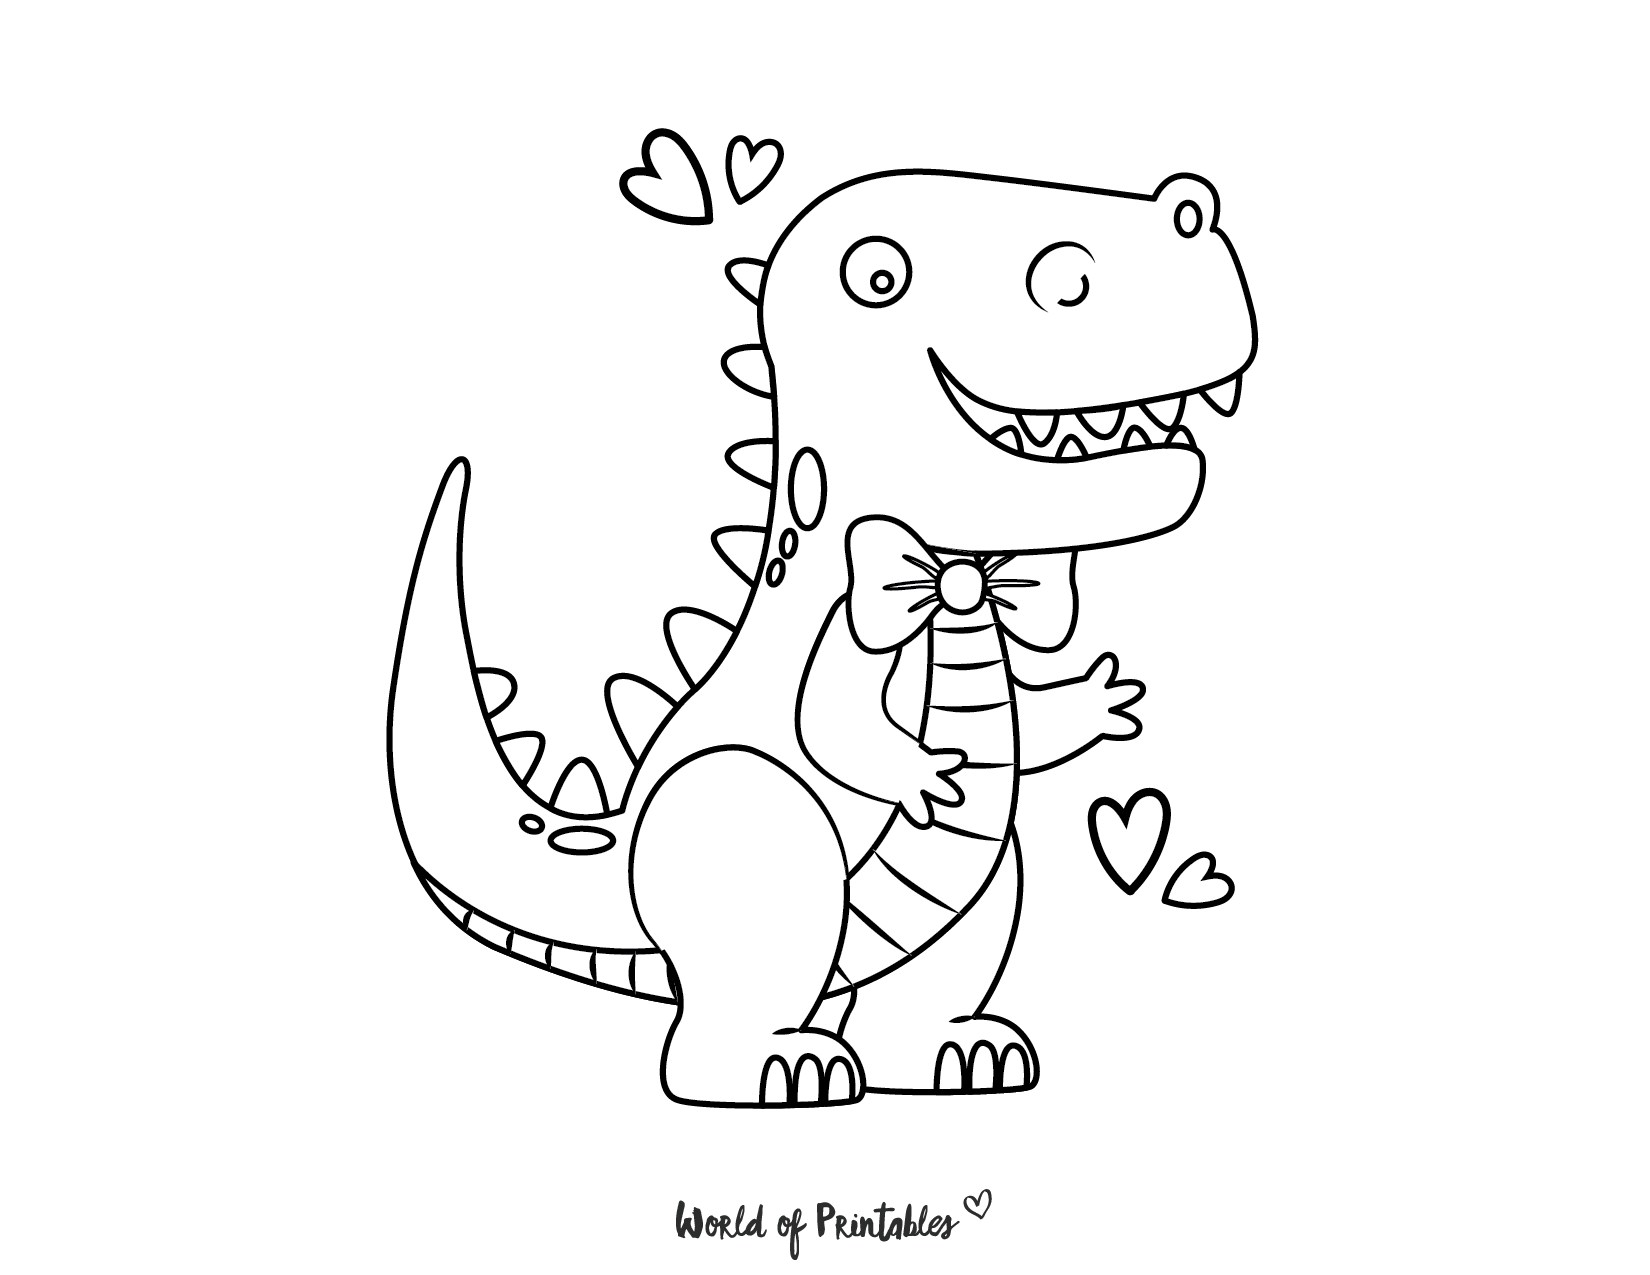 Dinosaur Coloring Pages   20 Best Pages For Kids   World of Printables